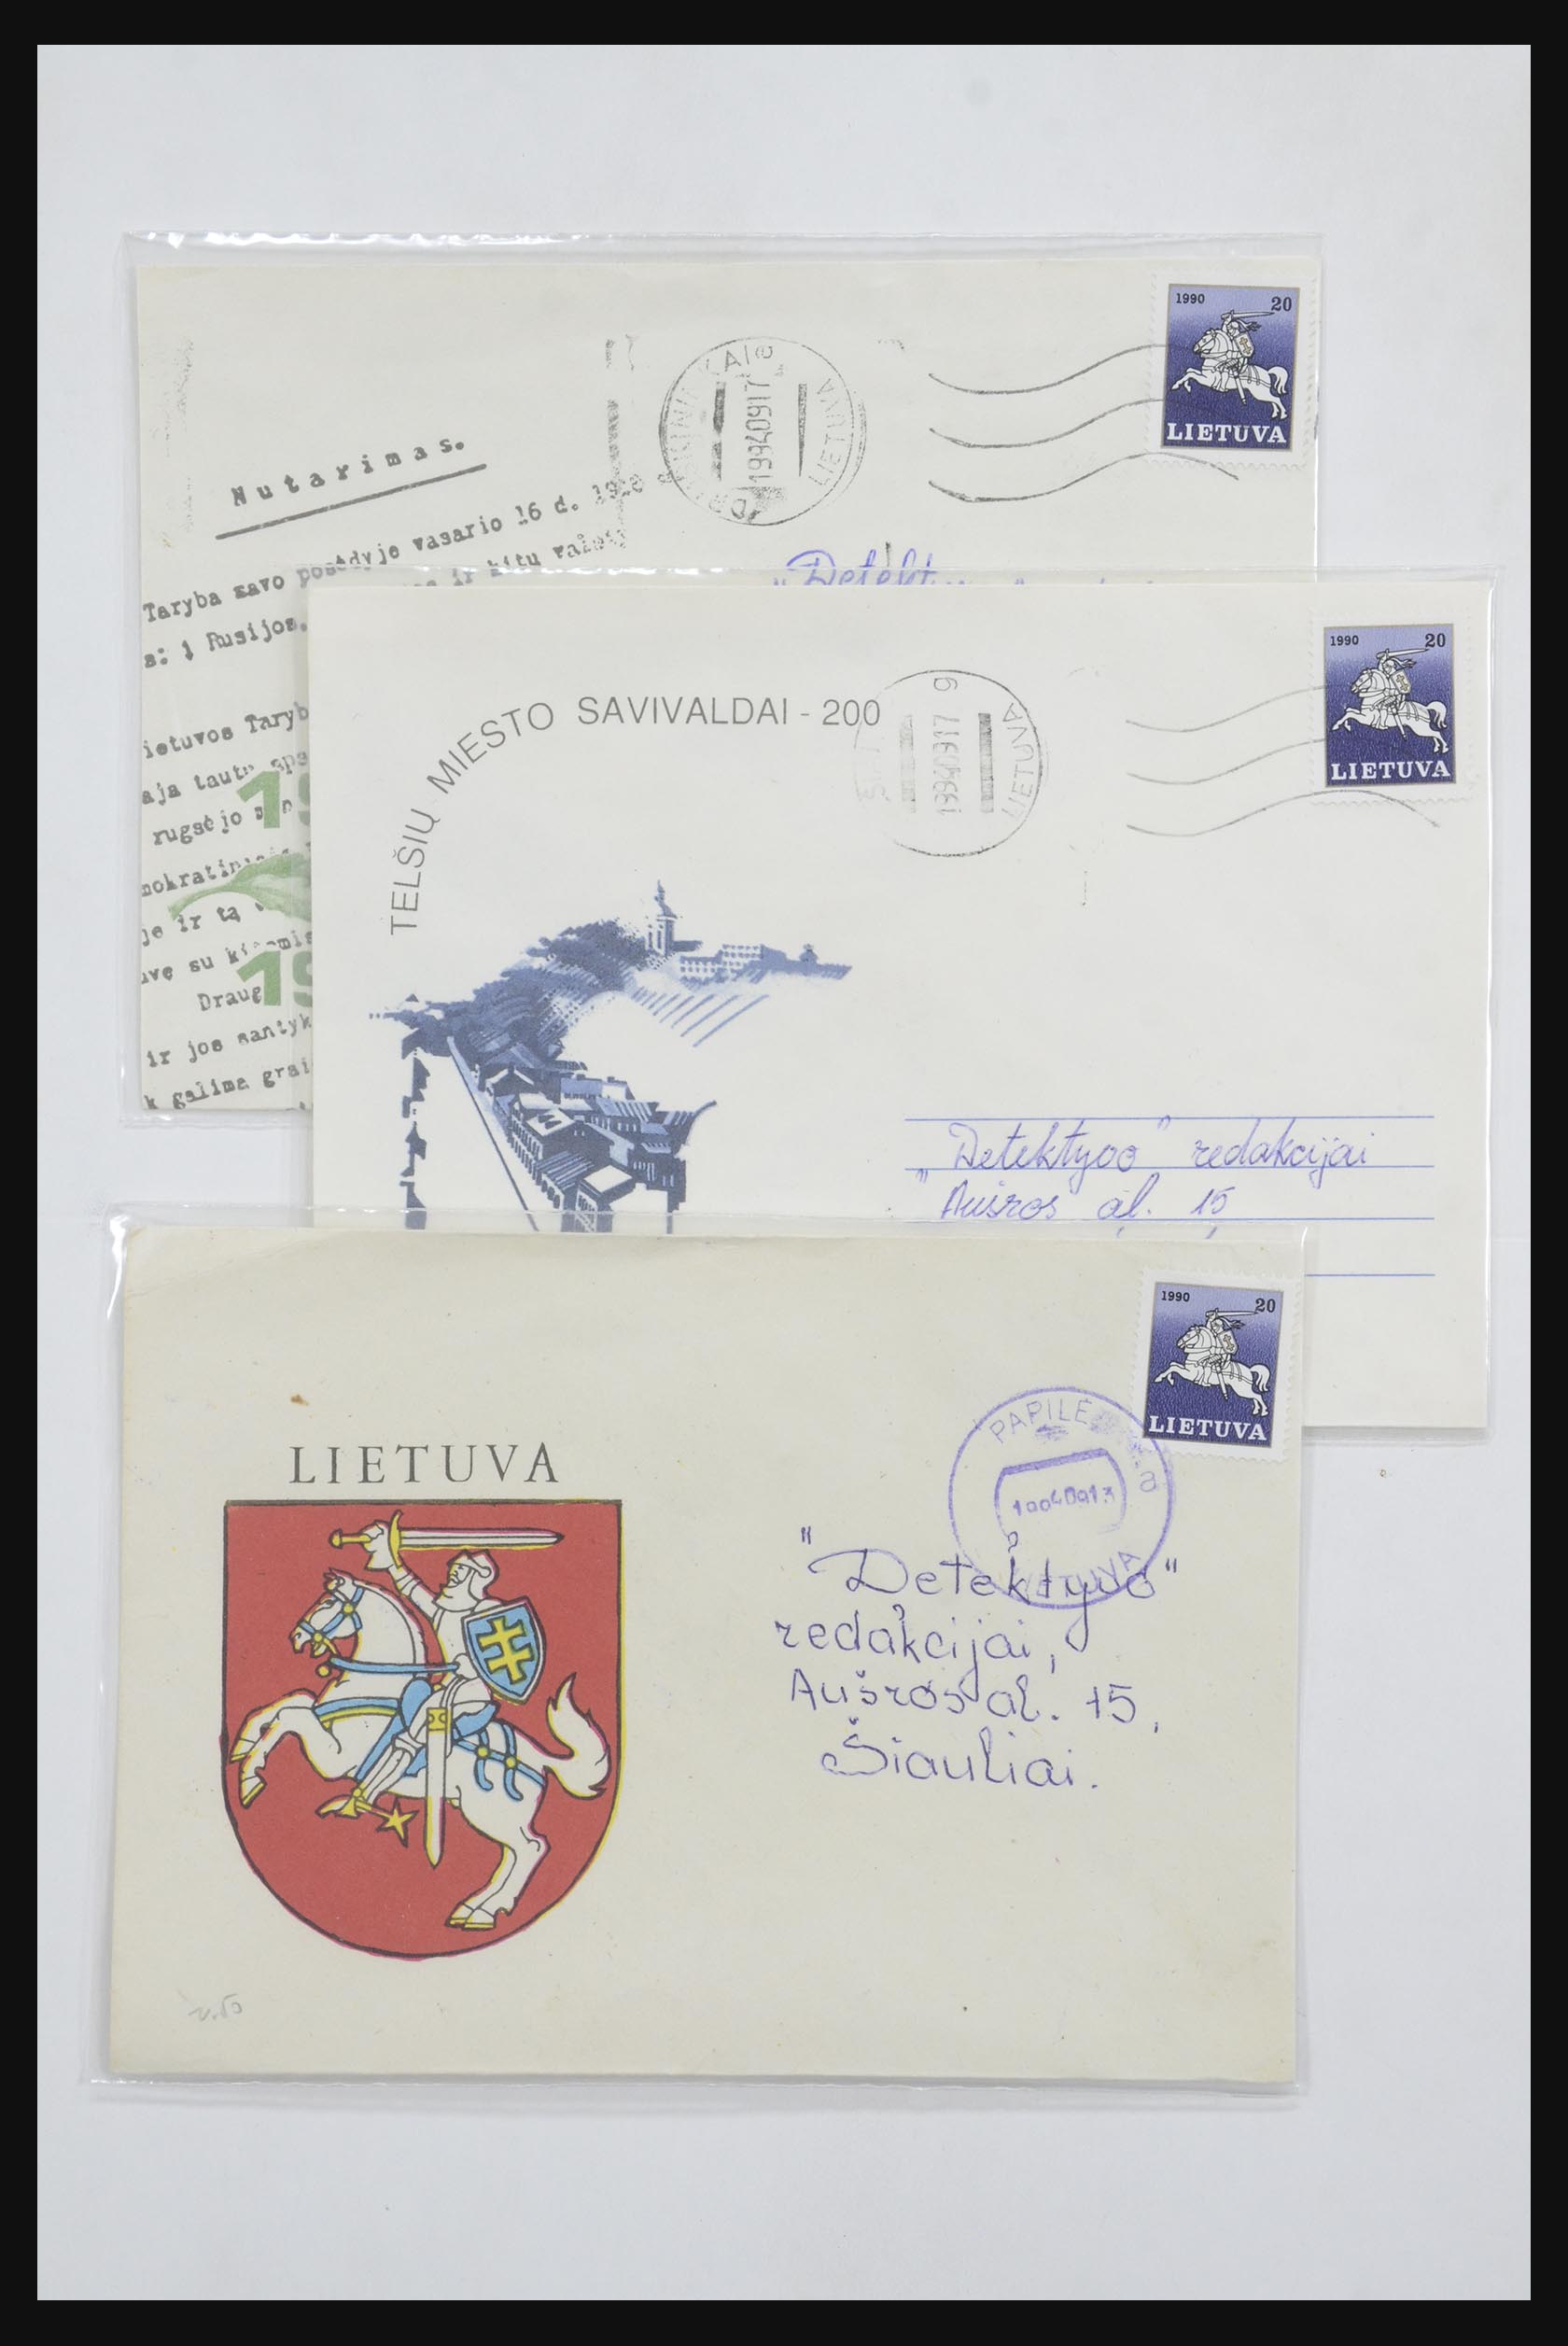 31928 1701 - 31928 Eastern Europe covers 1960's-1990's.